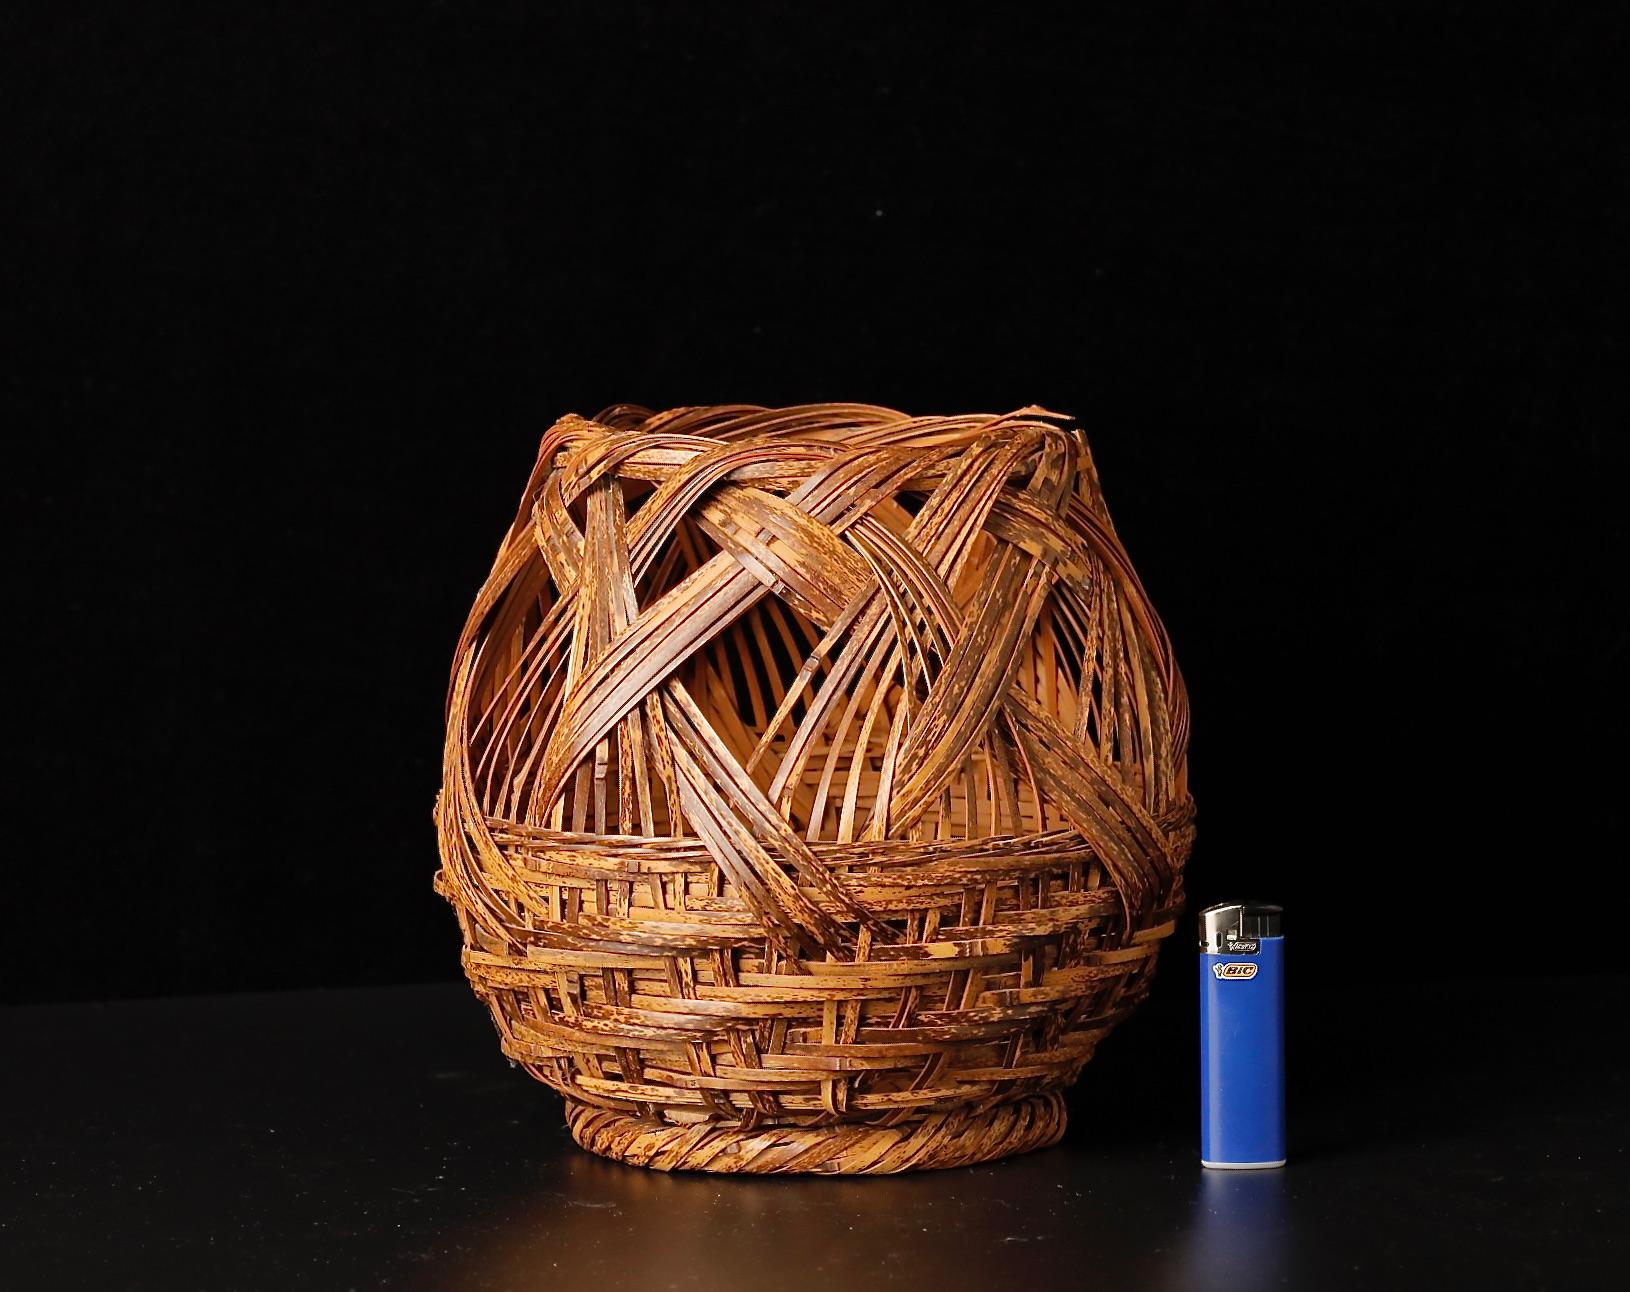 Japanese Ikebana Bamboo Basket Contemporary design
Size : W 23.5cm x23.5cm H.23cm ( W.9.3inch x 9.3inch x H.9 inch )
Weight : 280gr (0.6lb)

good condition, with some minor abrasions as you see in photos

International Buyers – Please Note:
·Import